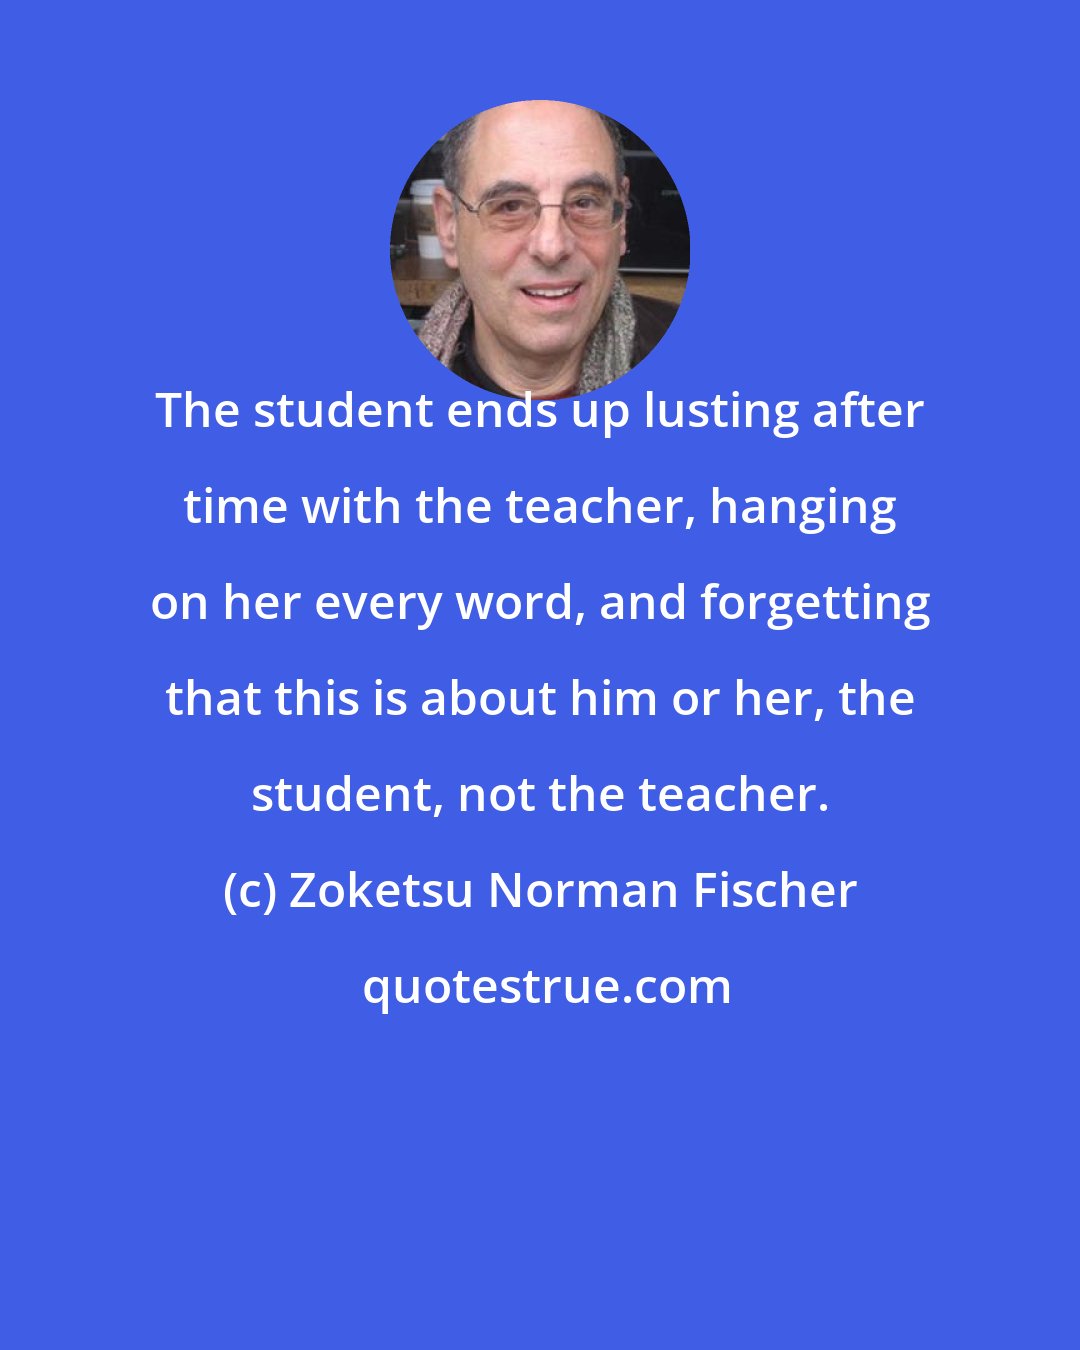 Zoketsu Norman Fischer: The student ends up lusting after time with the teacher, hanging on her every word, and forgetting that this is about him or her, the student, not the teacher.